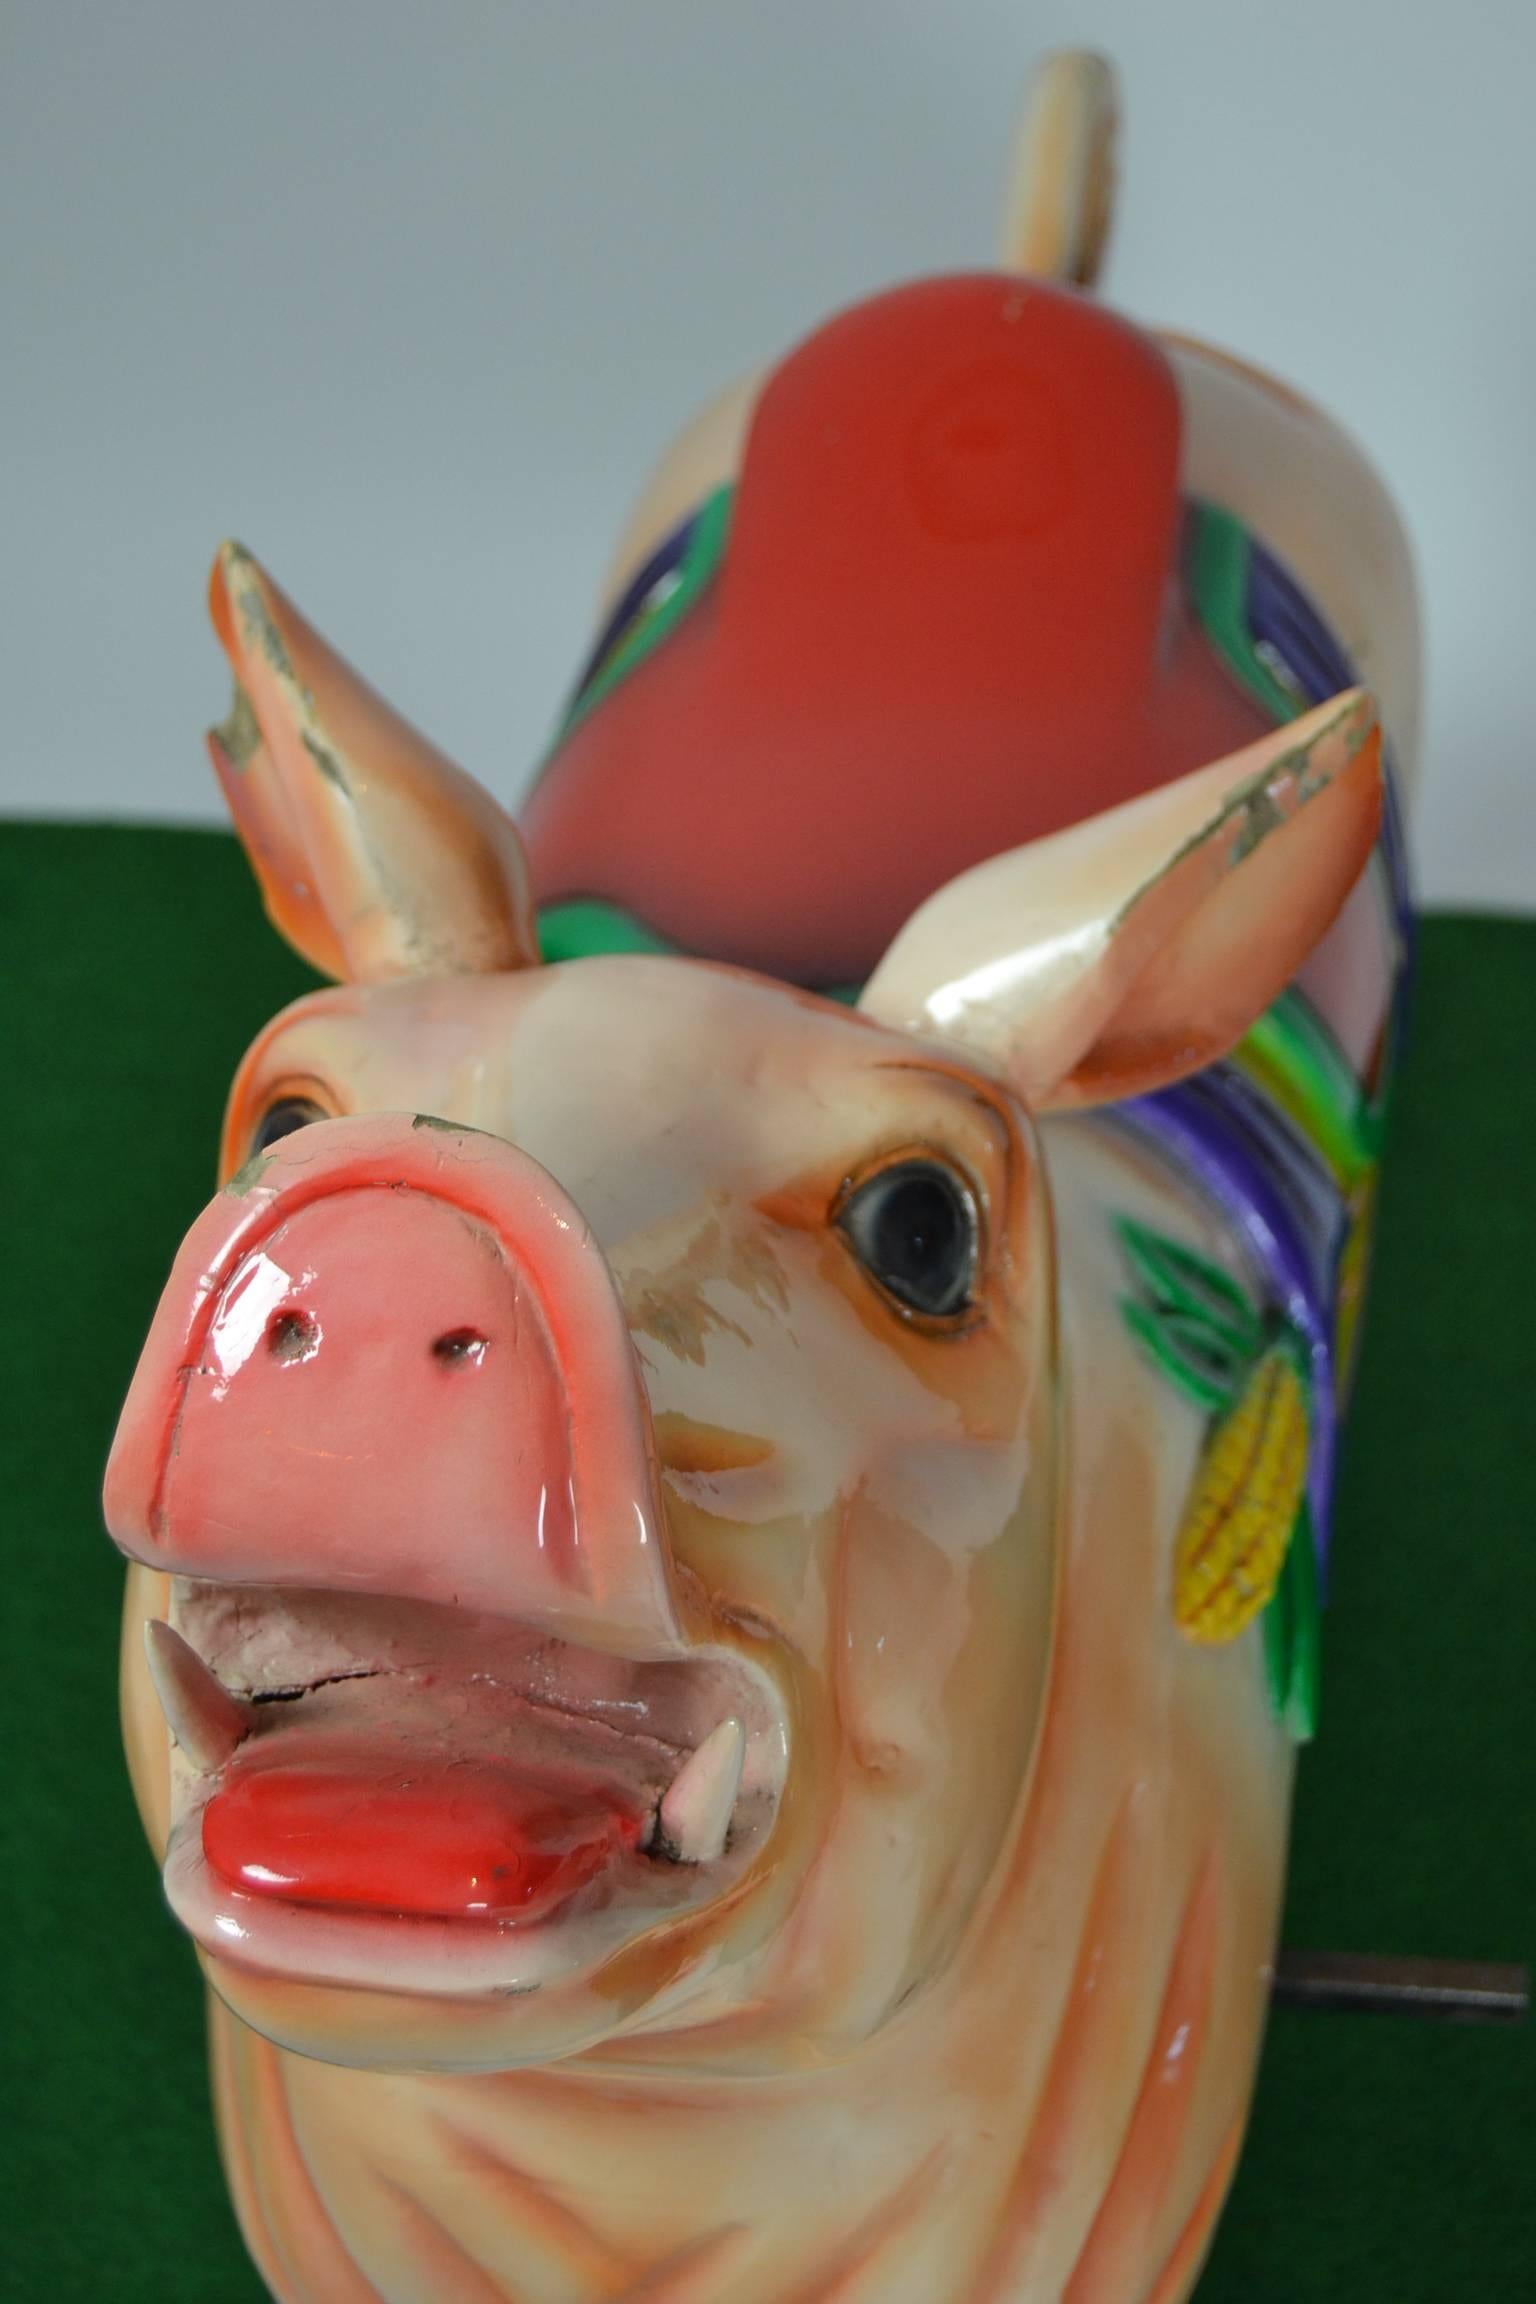 A carved wood carousel animal.
Full size vintage carnival ride pig on a metal base for child or adult.
Carver unknown, comes from a Dutch carousel ride, late 20th century.

Nice piece of decoration in a Butcher's shop or restaurant in